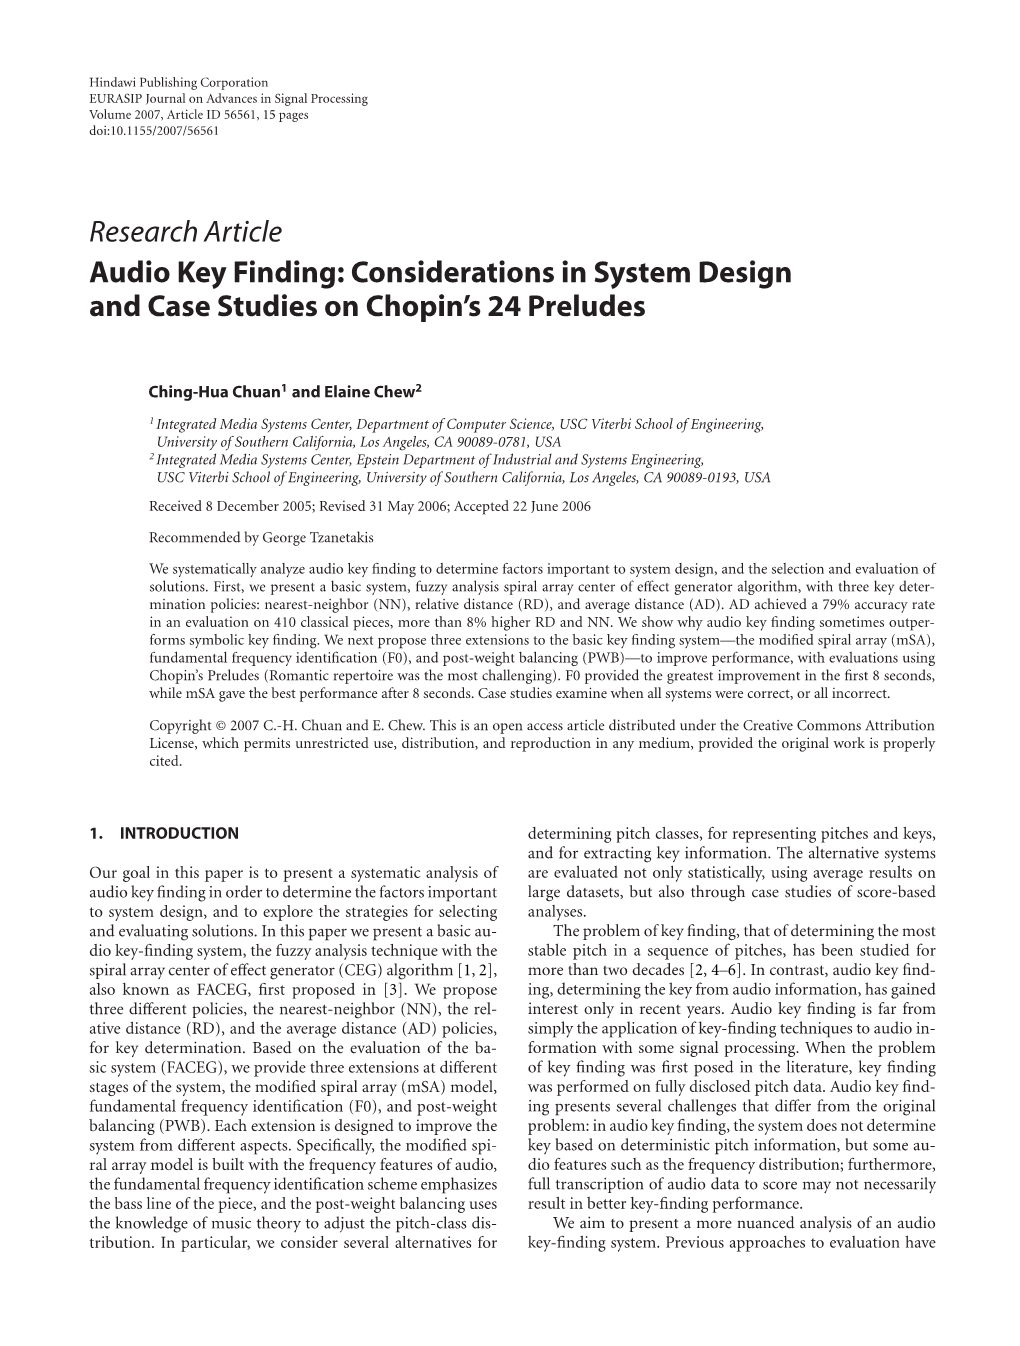 Research Article Audio Key Finding: Considerations in System Design and Case Studies on Chopin’S 24 Preludes